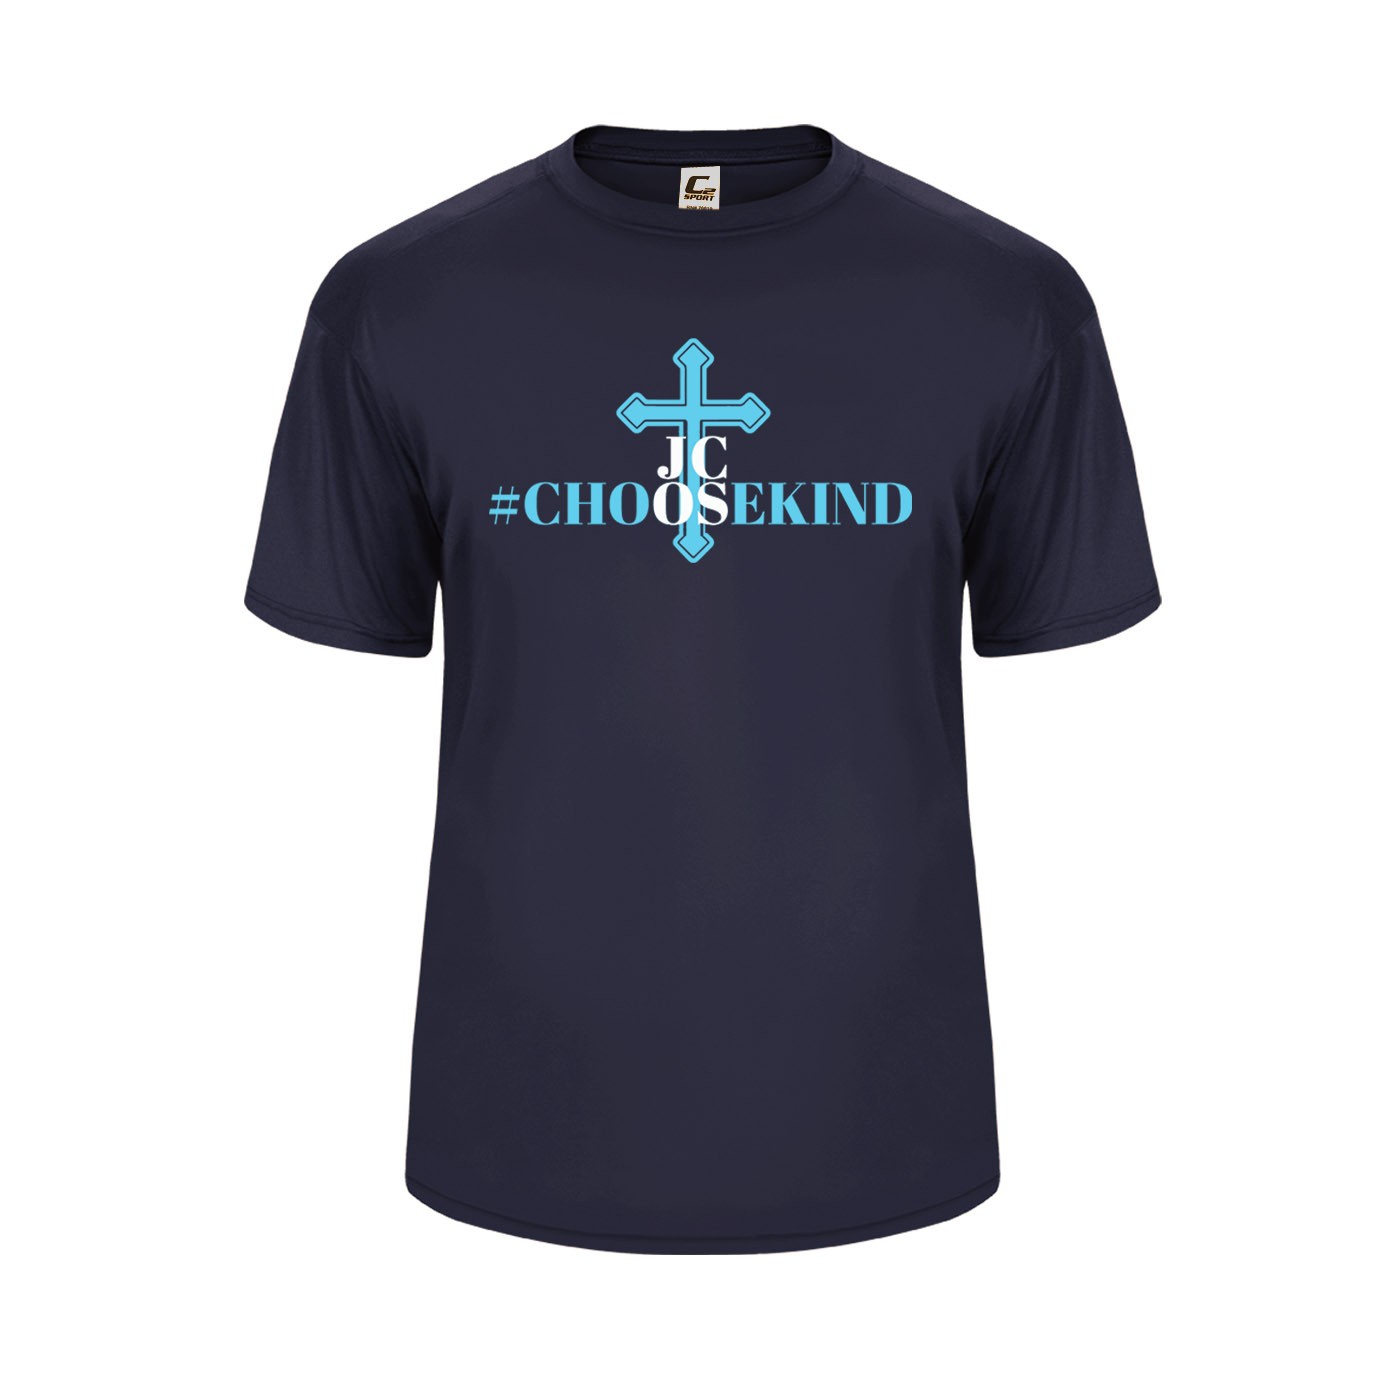 JCOS Staff S/S Performance T-Shirt w/ Choose Kindness Logo #F14 - Please Allow 3-4 Weeks for Delivery